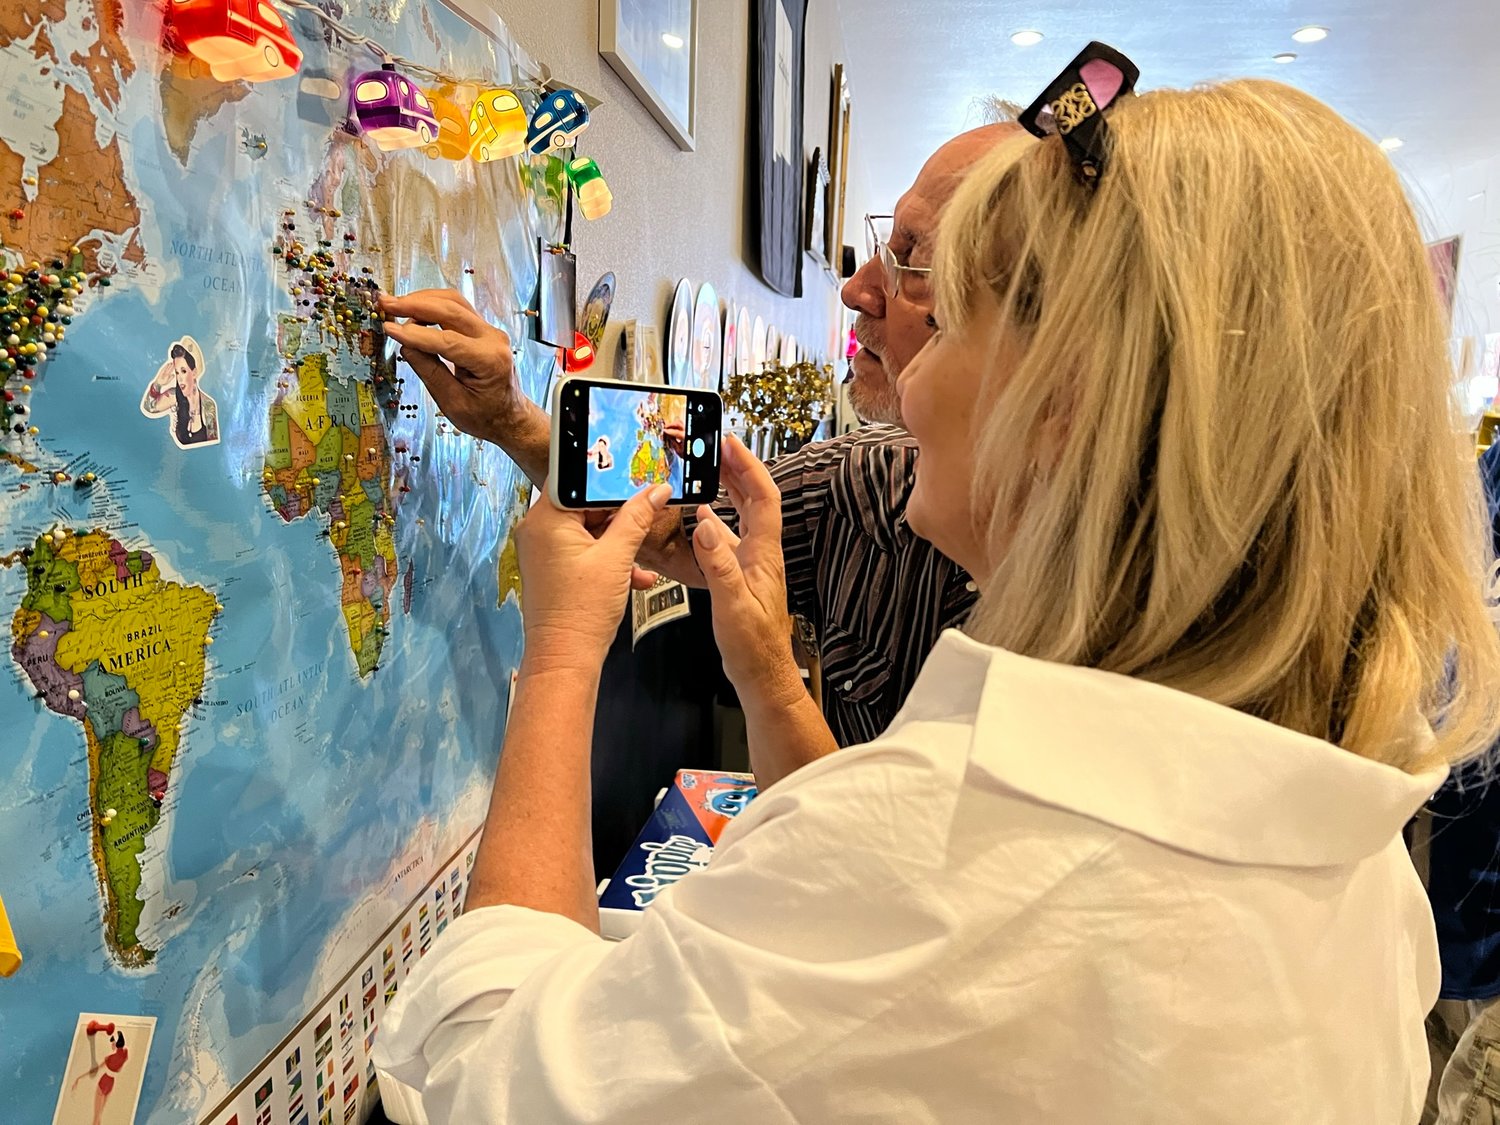 Ukrainian born Alla California, examines her hometown on a map on the wall at Downtown Blues Coffee. Her husband, Donald Jackson, places a pin on the town of Luhansk where she is from.